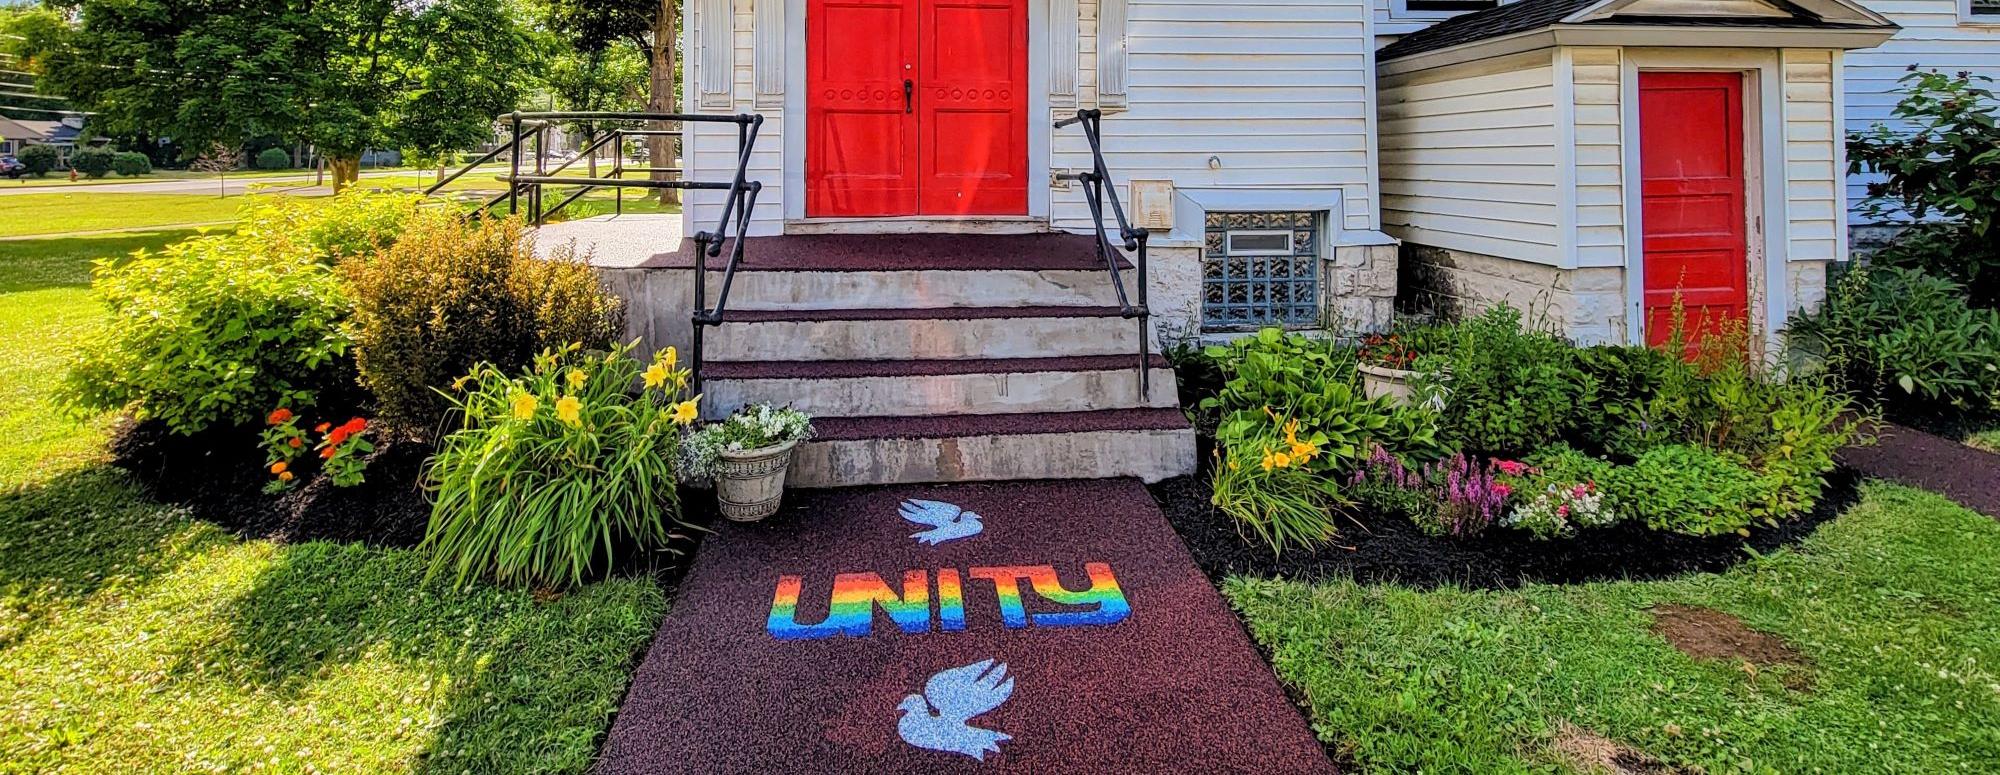 photo of main entry of the church building: red doors, rainbow UNITY logo and peace dove inlays